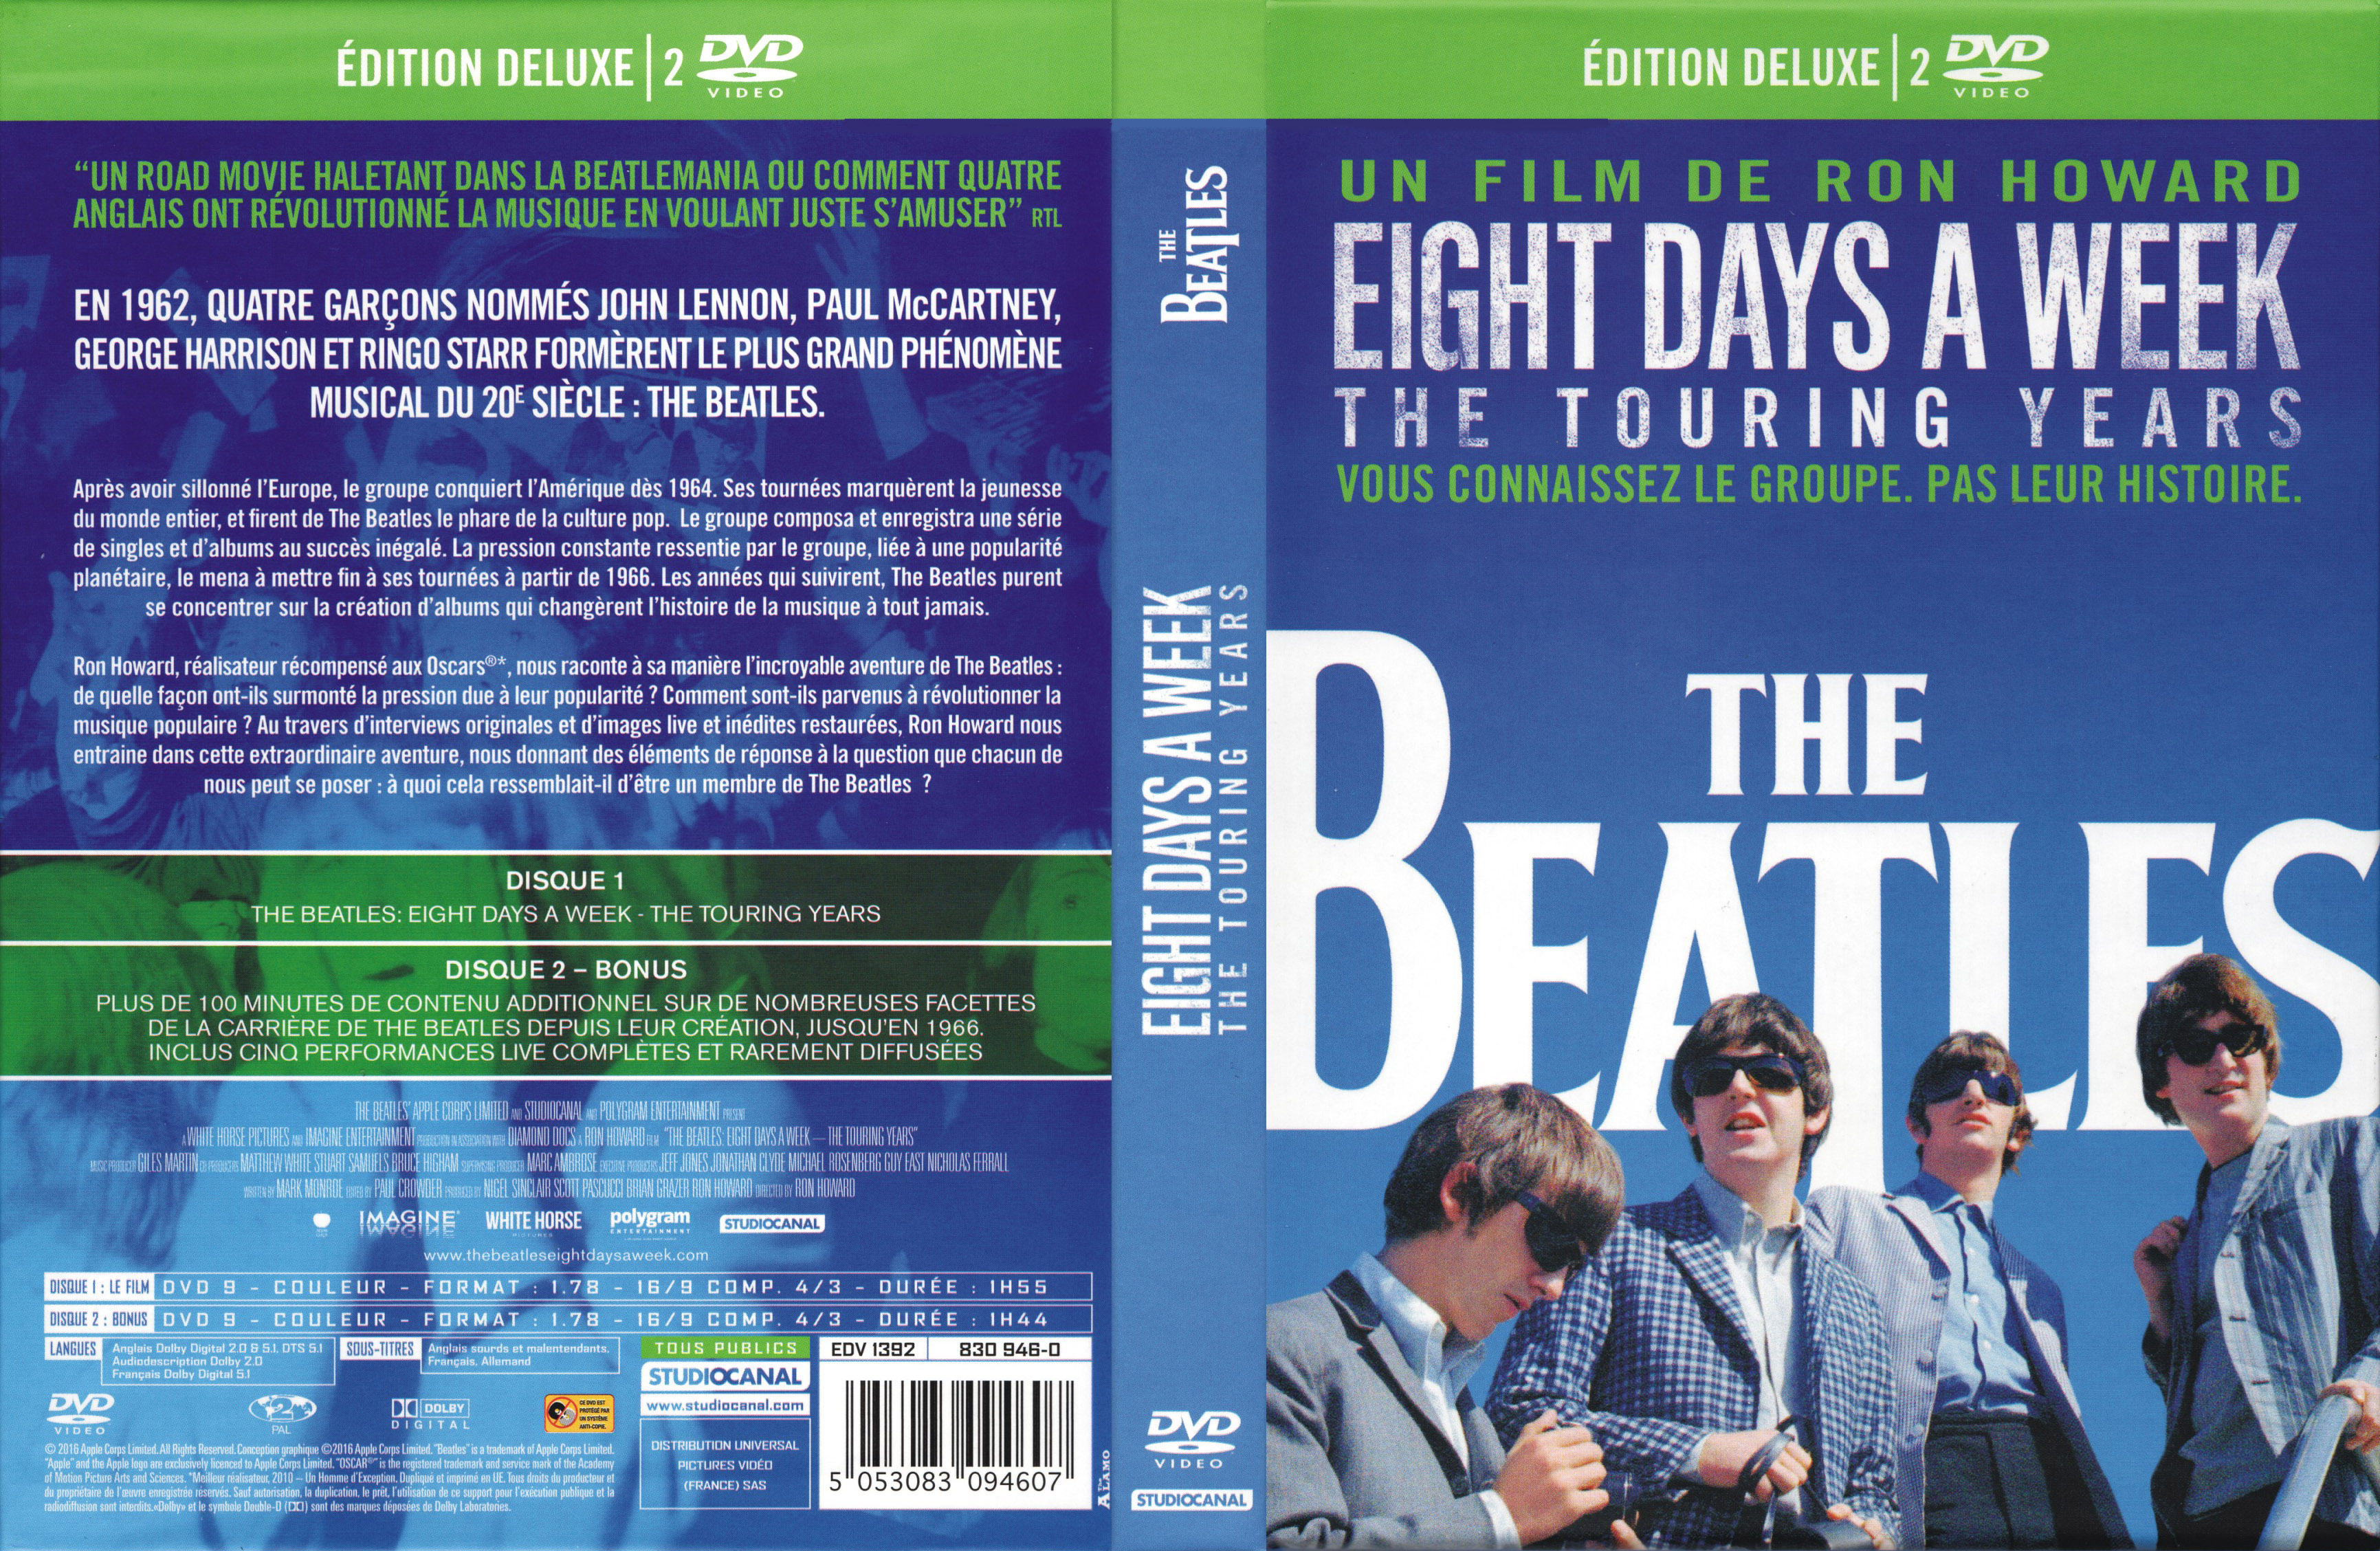 Jaquette DVD The Beatles Eight days a week - The touring years